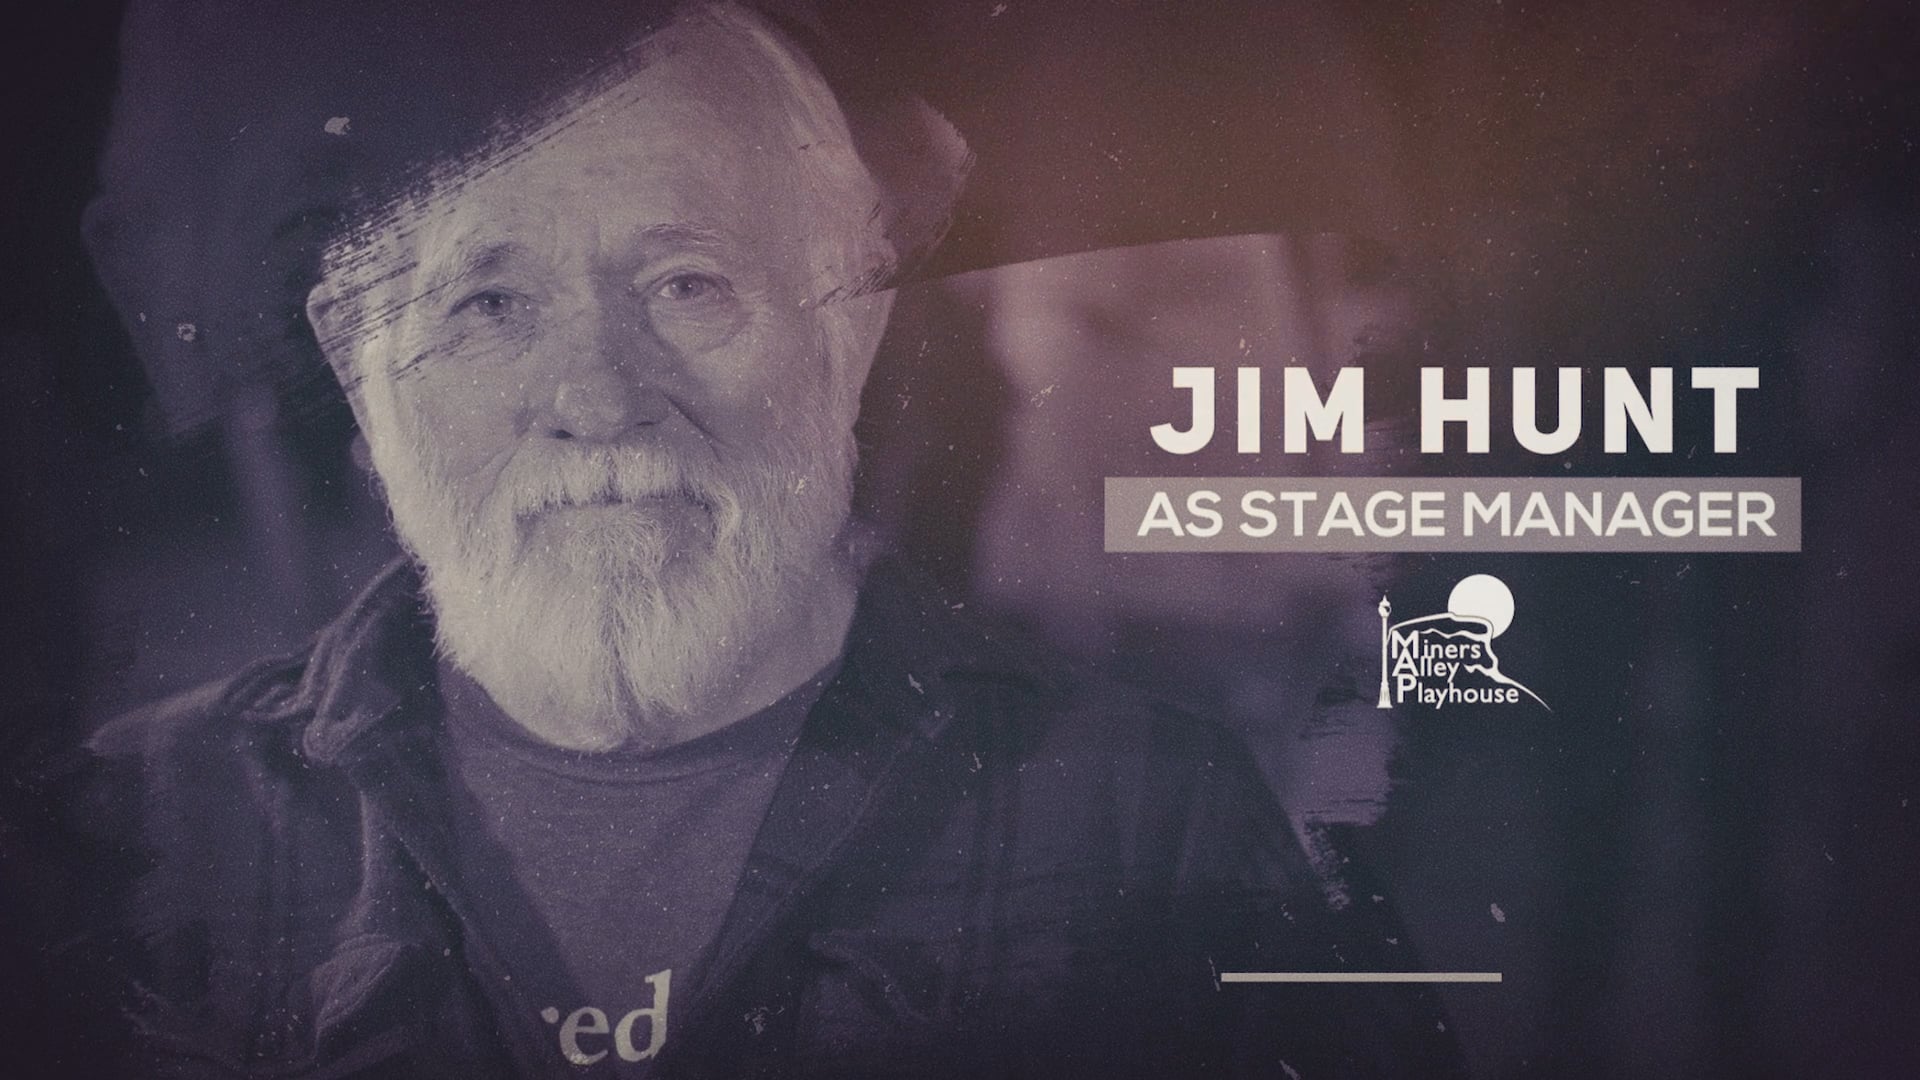 Meet the Citizens of Our Town - Jim Hunt as The Stage Manager